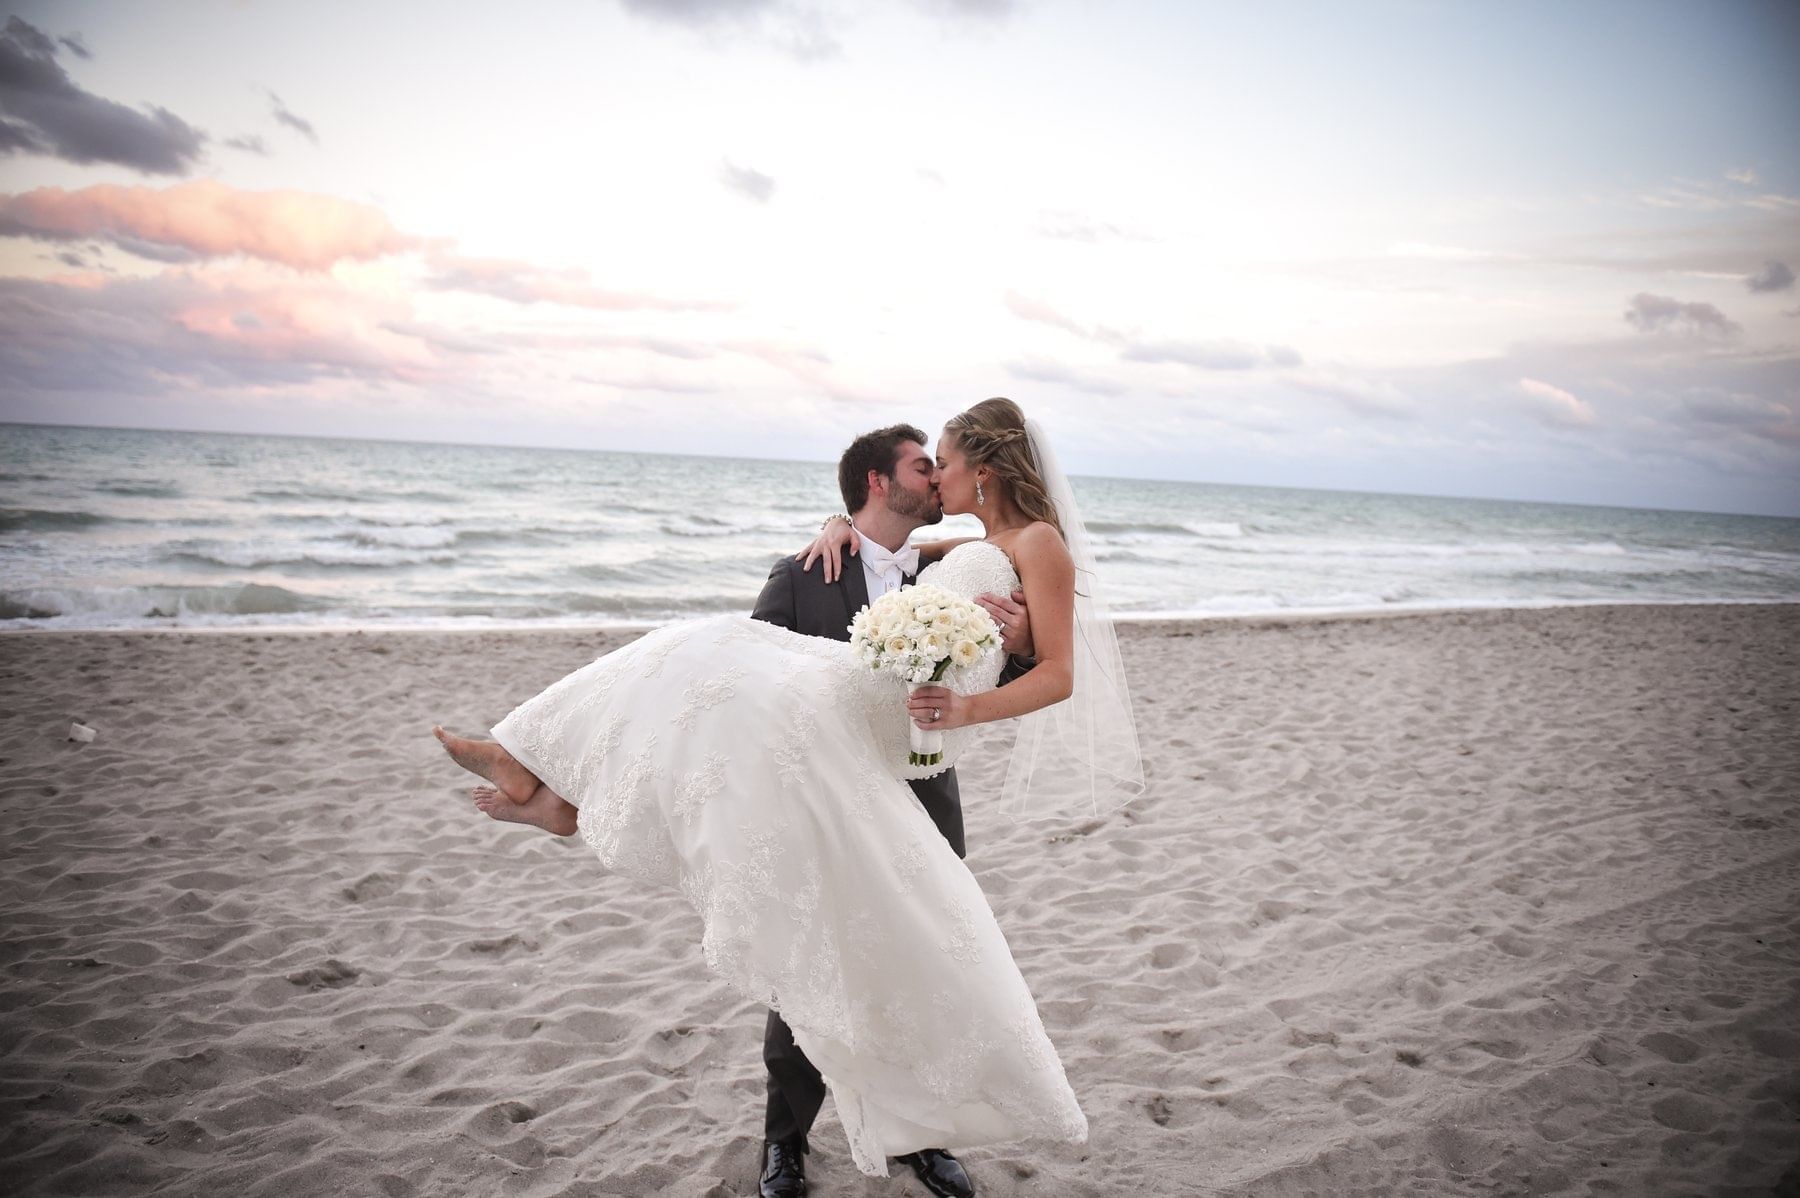 Groom Holding the Bride at the Beach at Diplomat Resort 00000000000000000